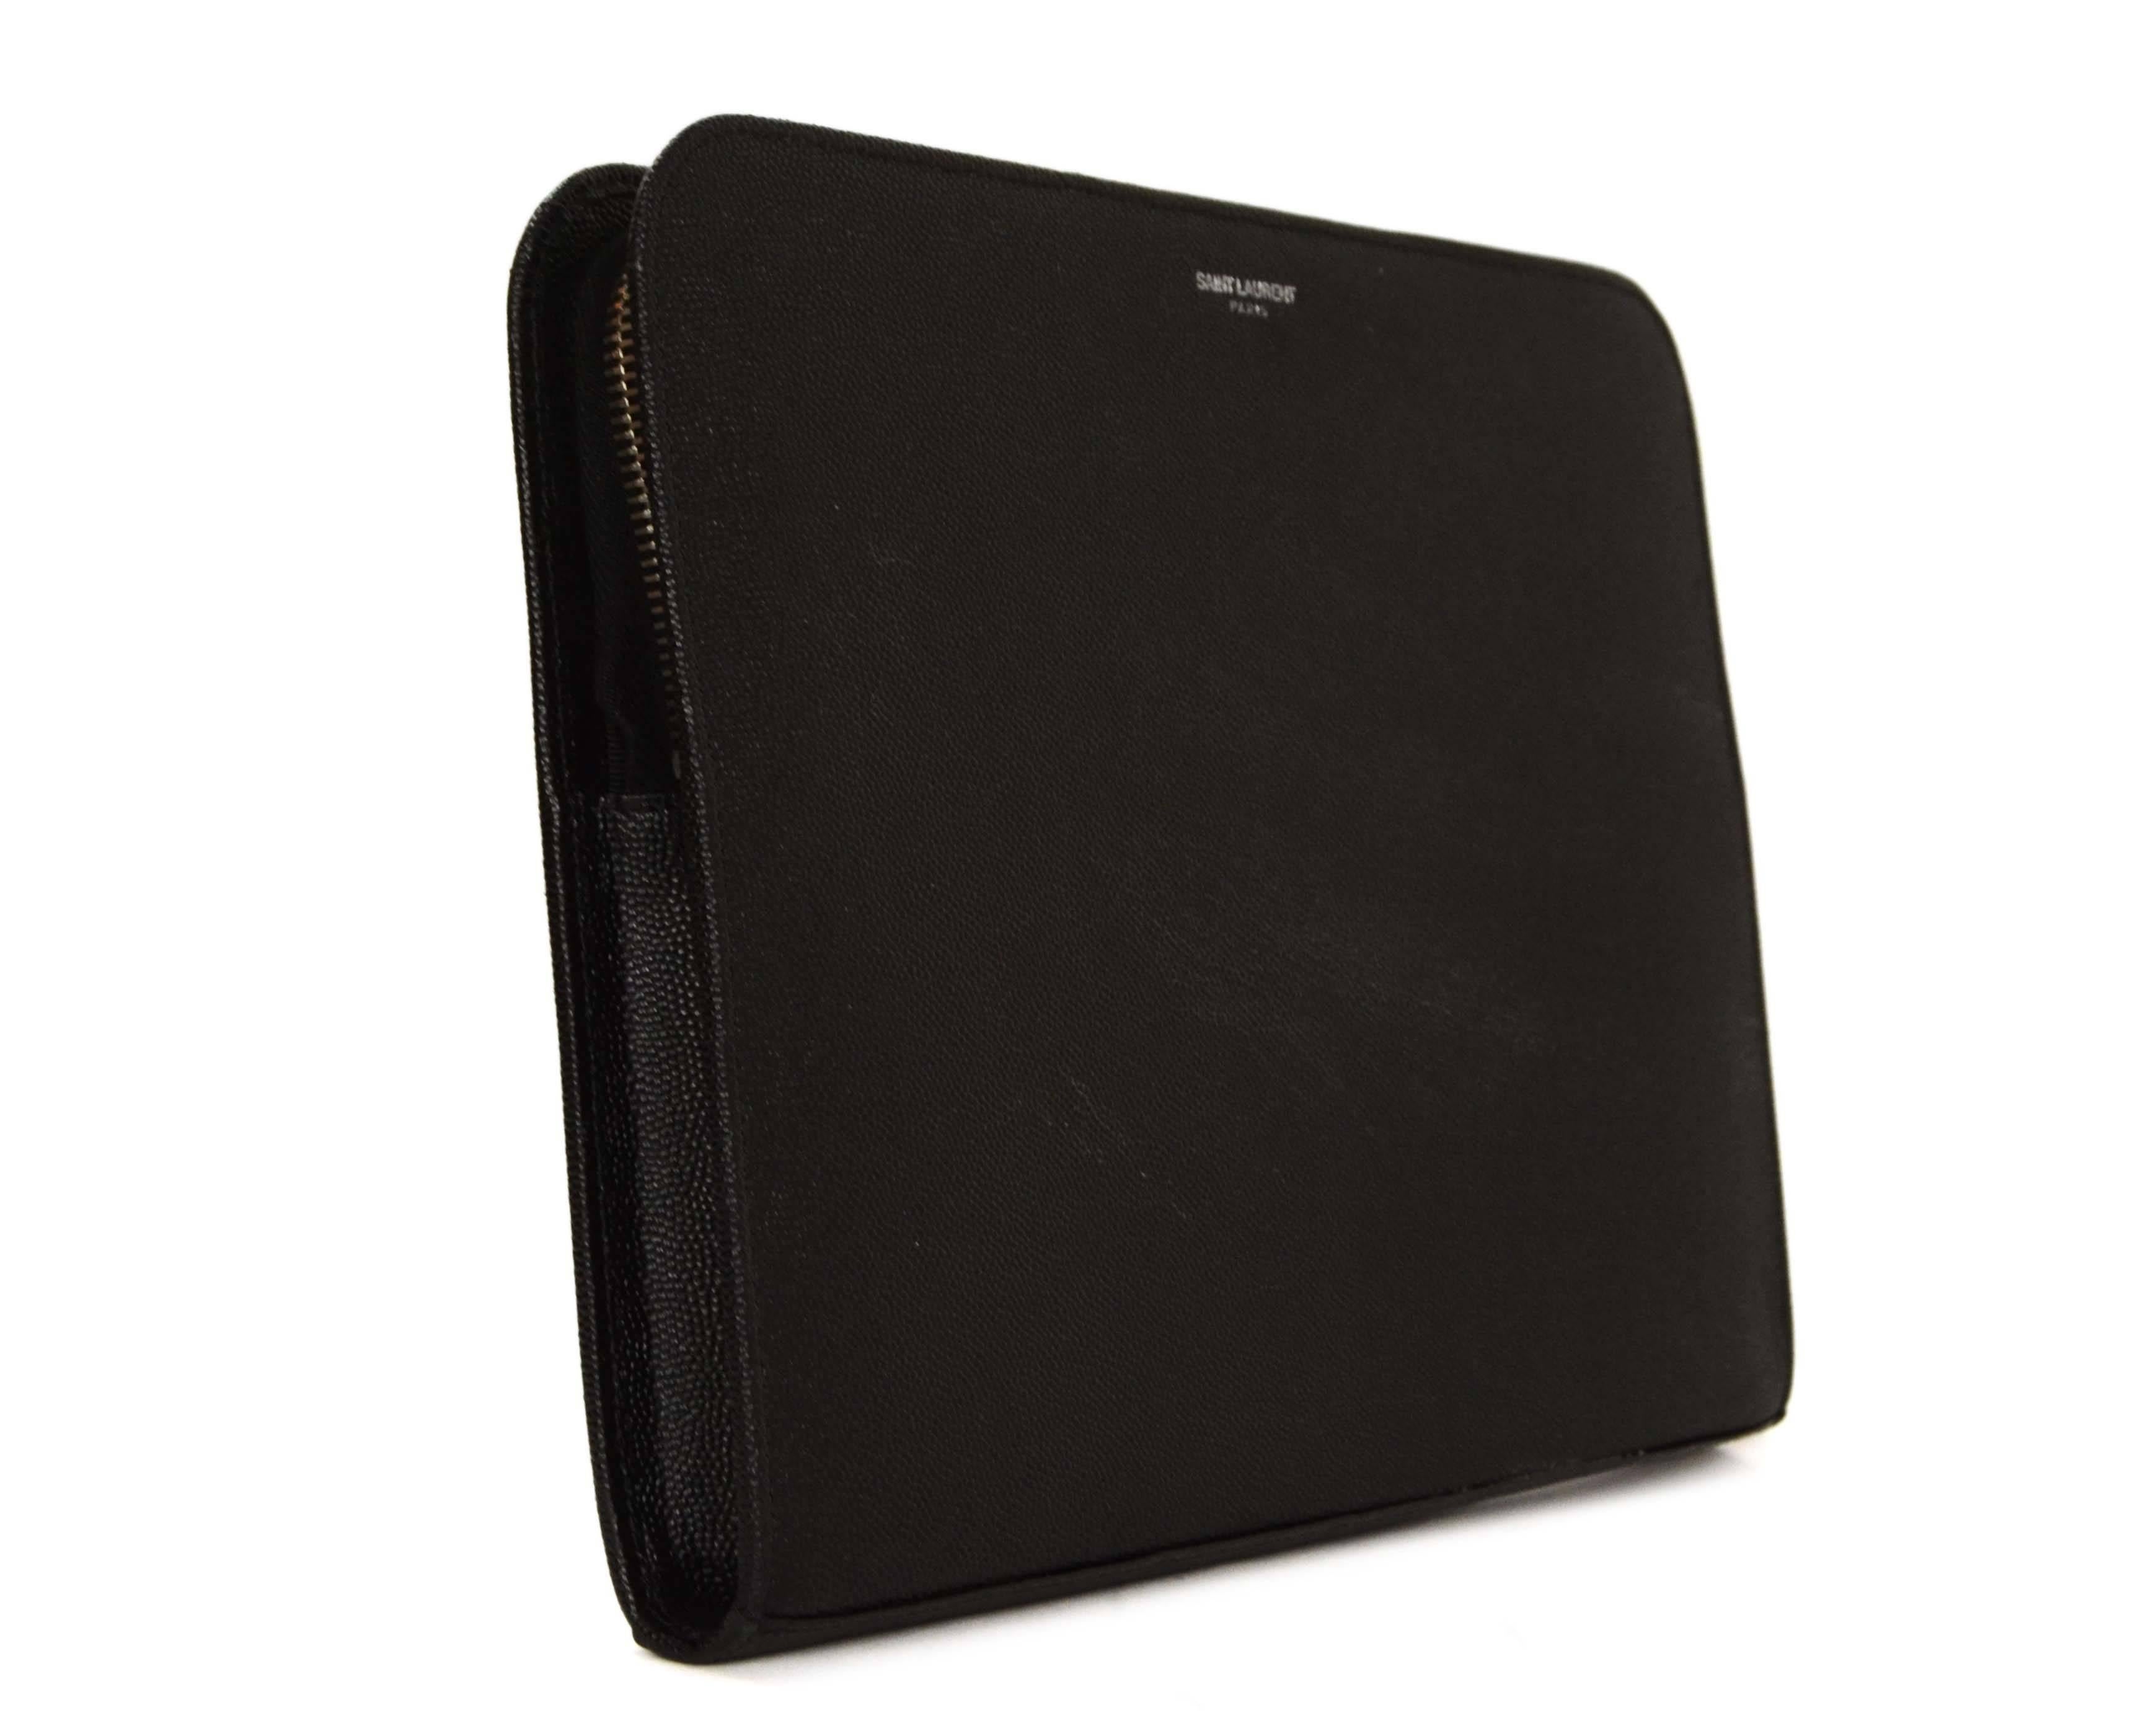 Features textured leather making bad more durable. This accessory is meant to be a case for an iPad but can double as a great, functional clutch!

-Made In: Italy
-Circa: 2015
-Color: Black
-Hardware: Silvertone
-Materials: Calf leather